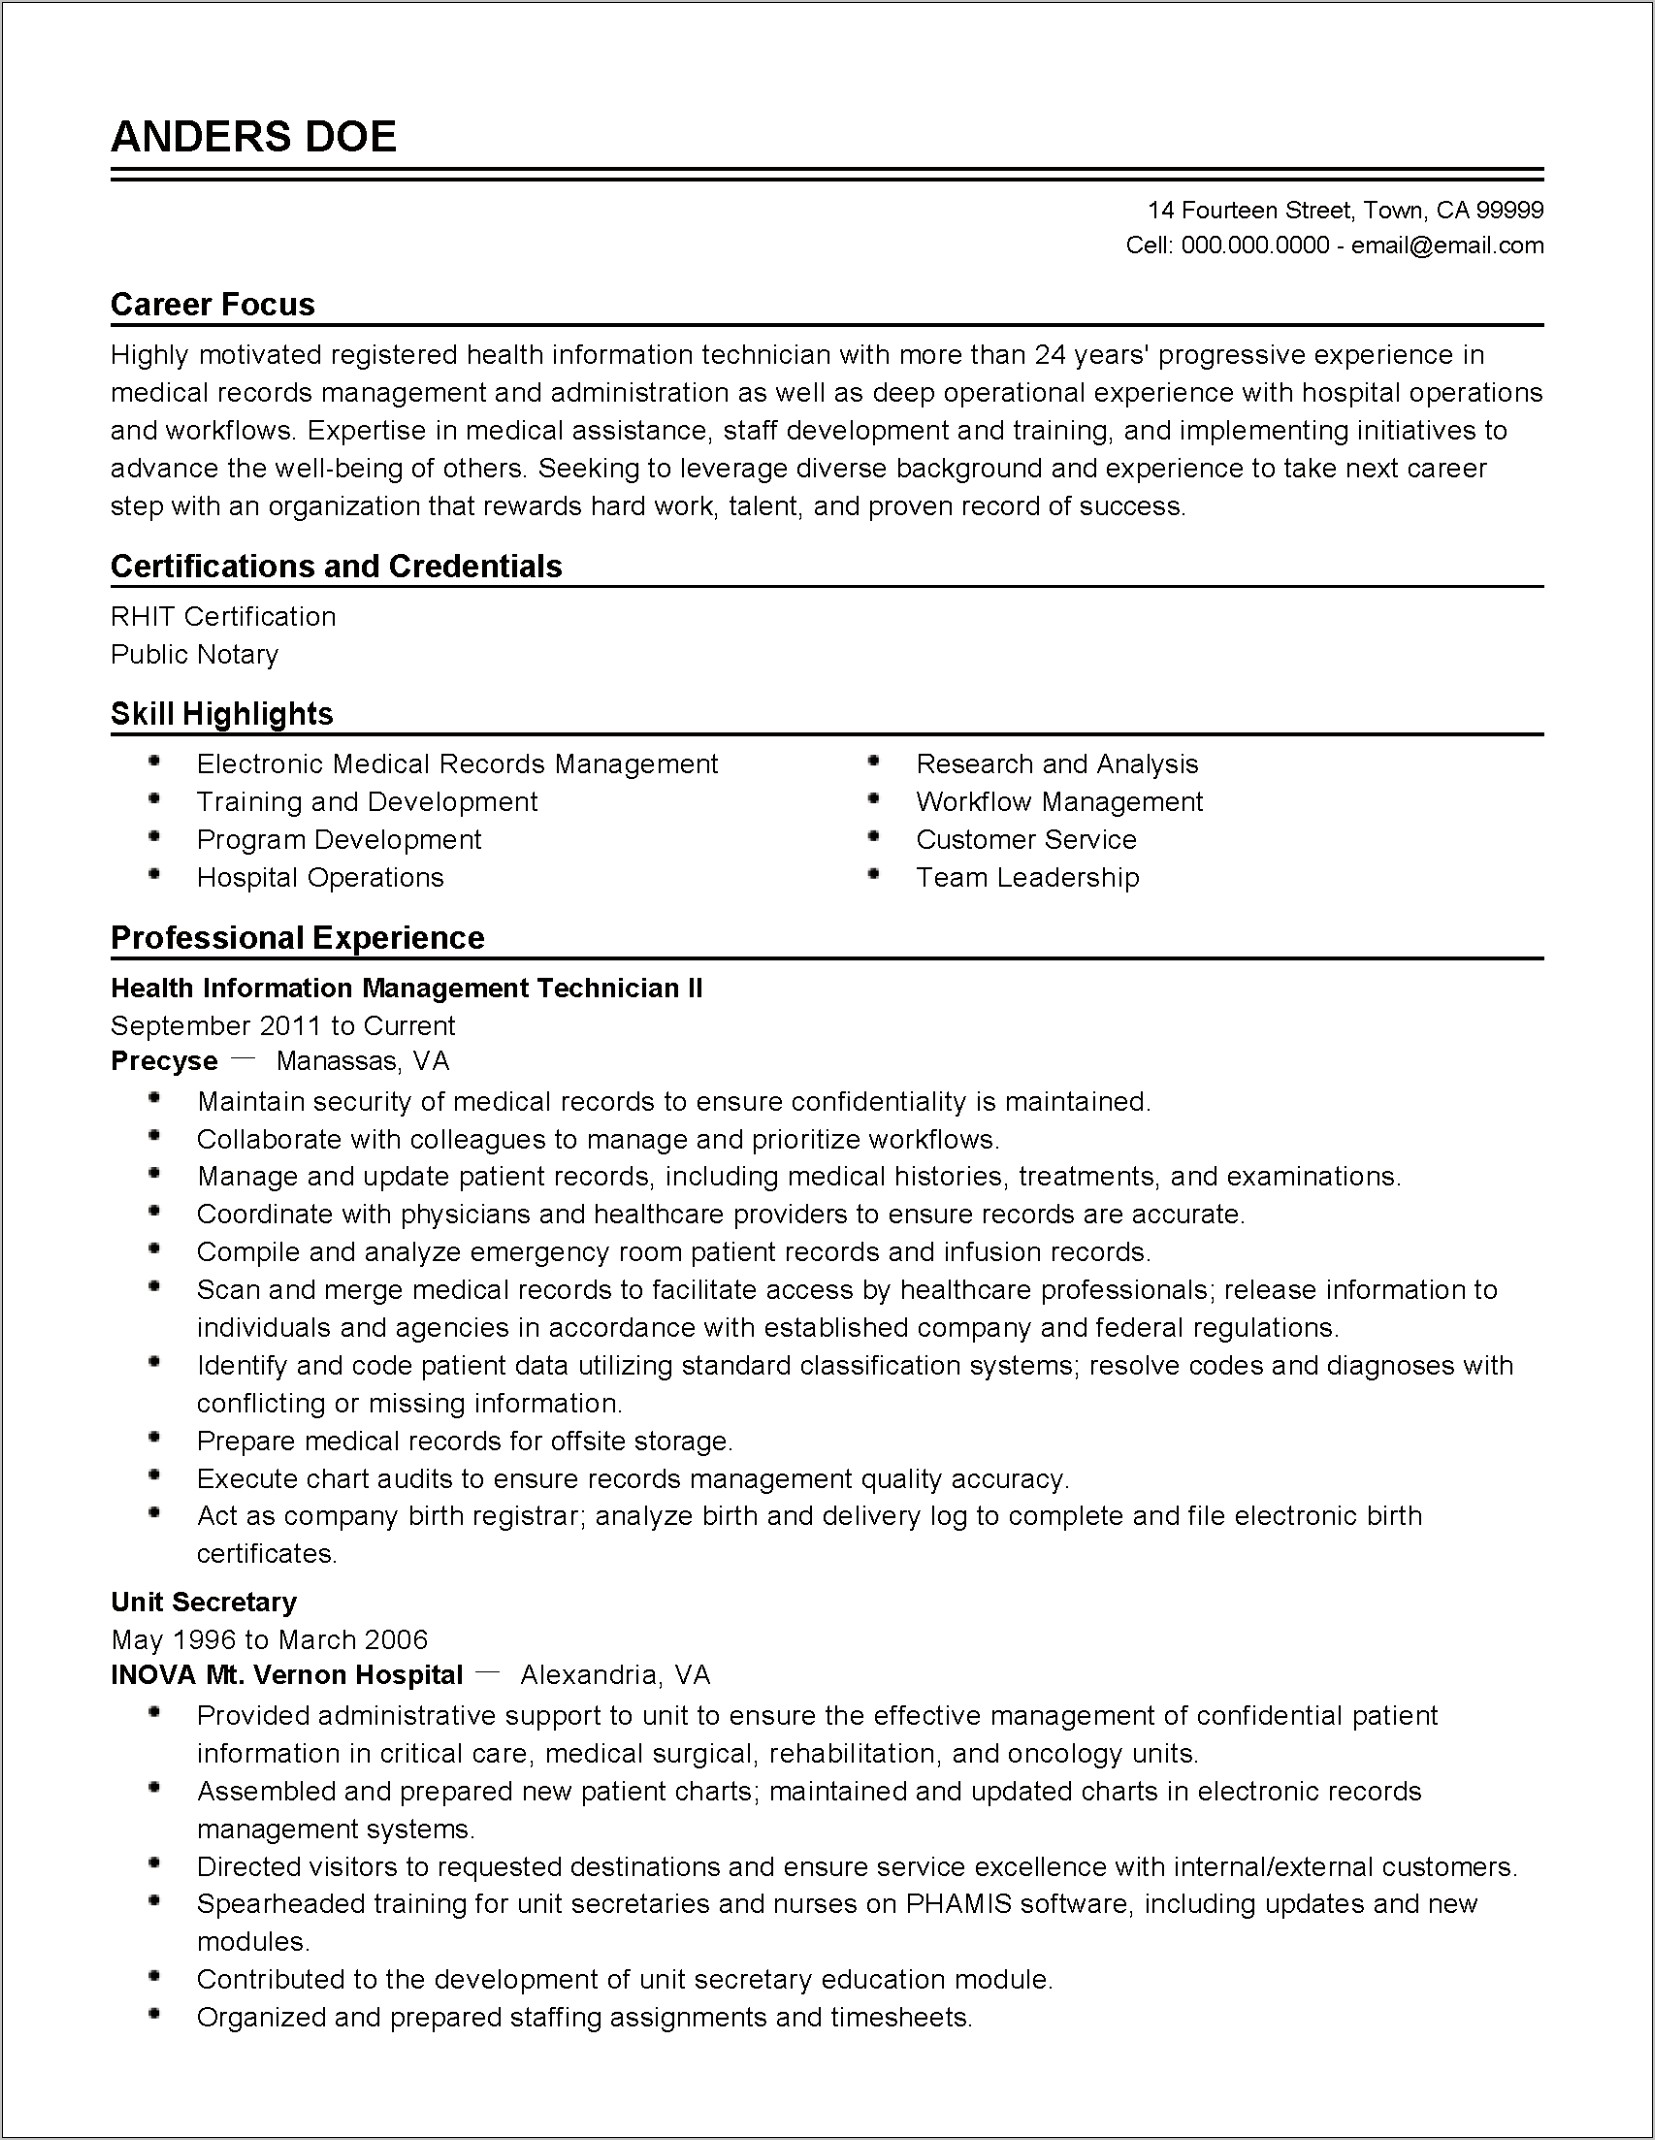 Information Technology Technician Resume Objective Examples